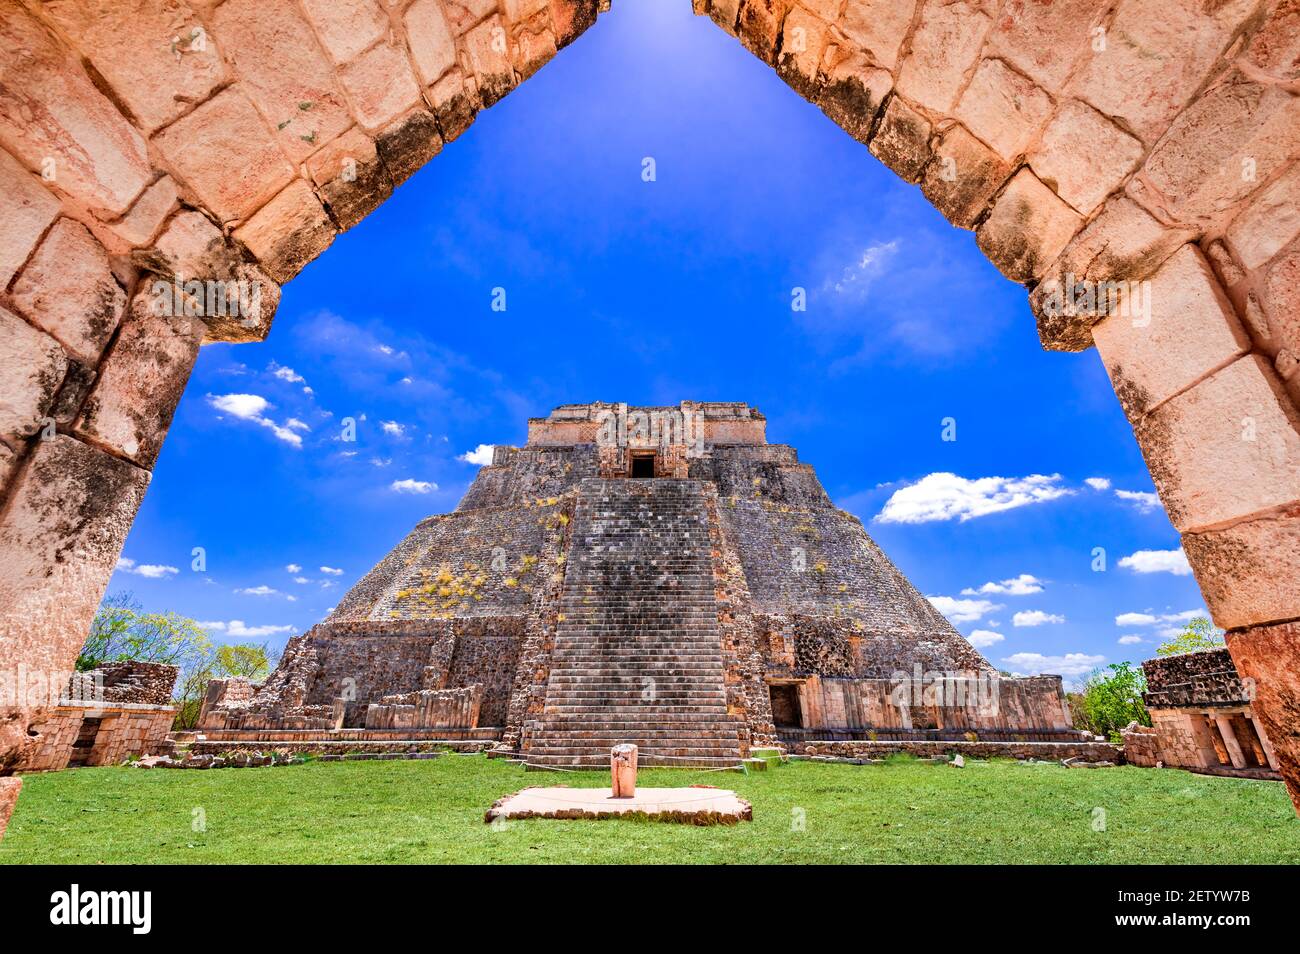 Uxmal, Pyramid of the Magician, pre-Hispanic ancient Maya city of the classical period in Mexico. Stock Photo